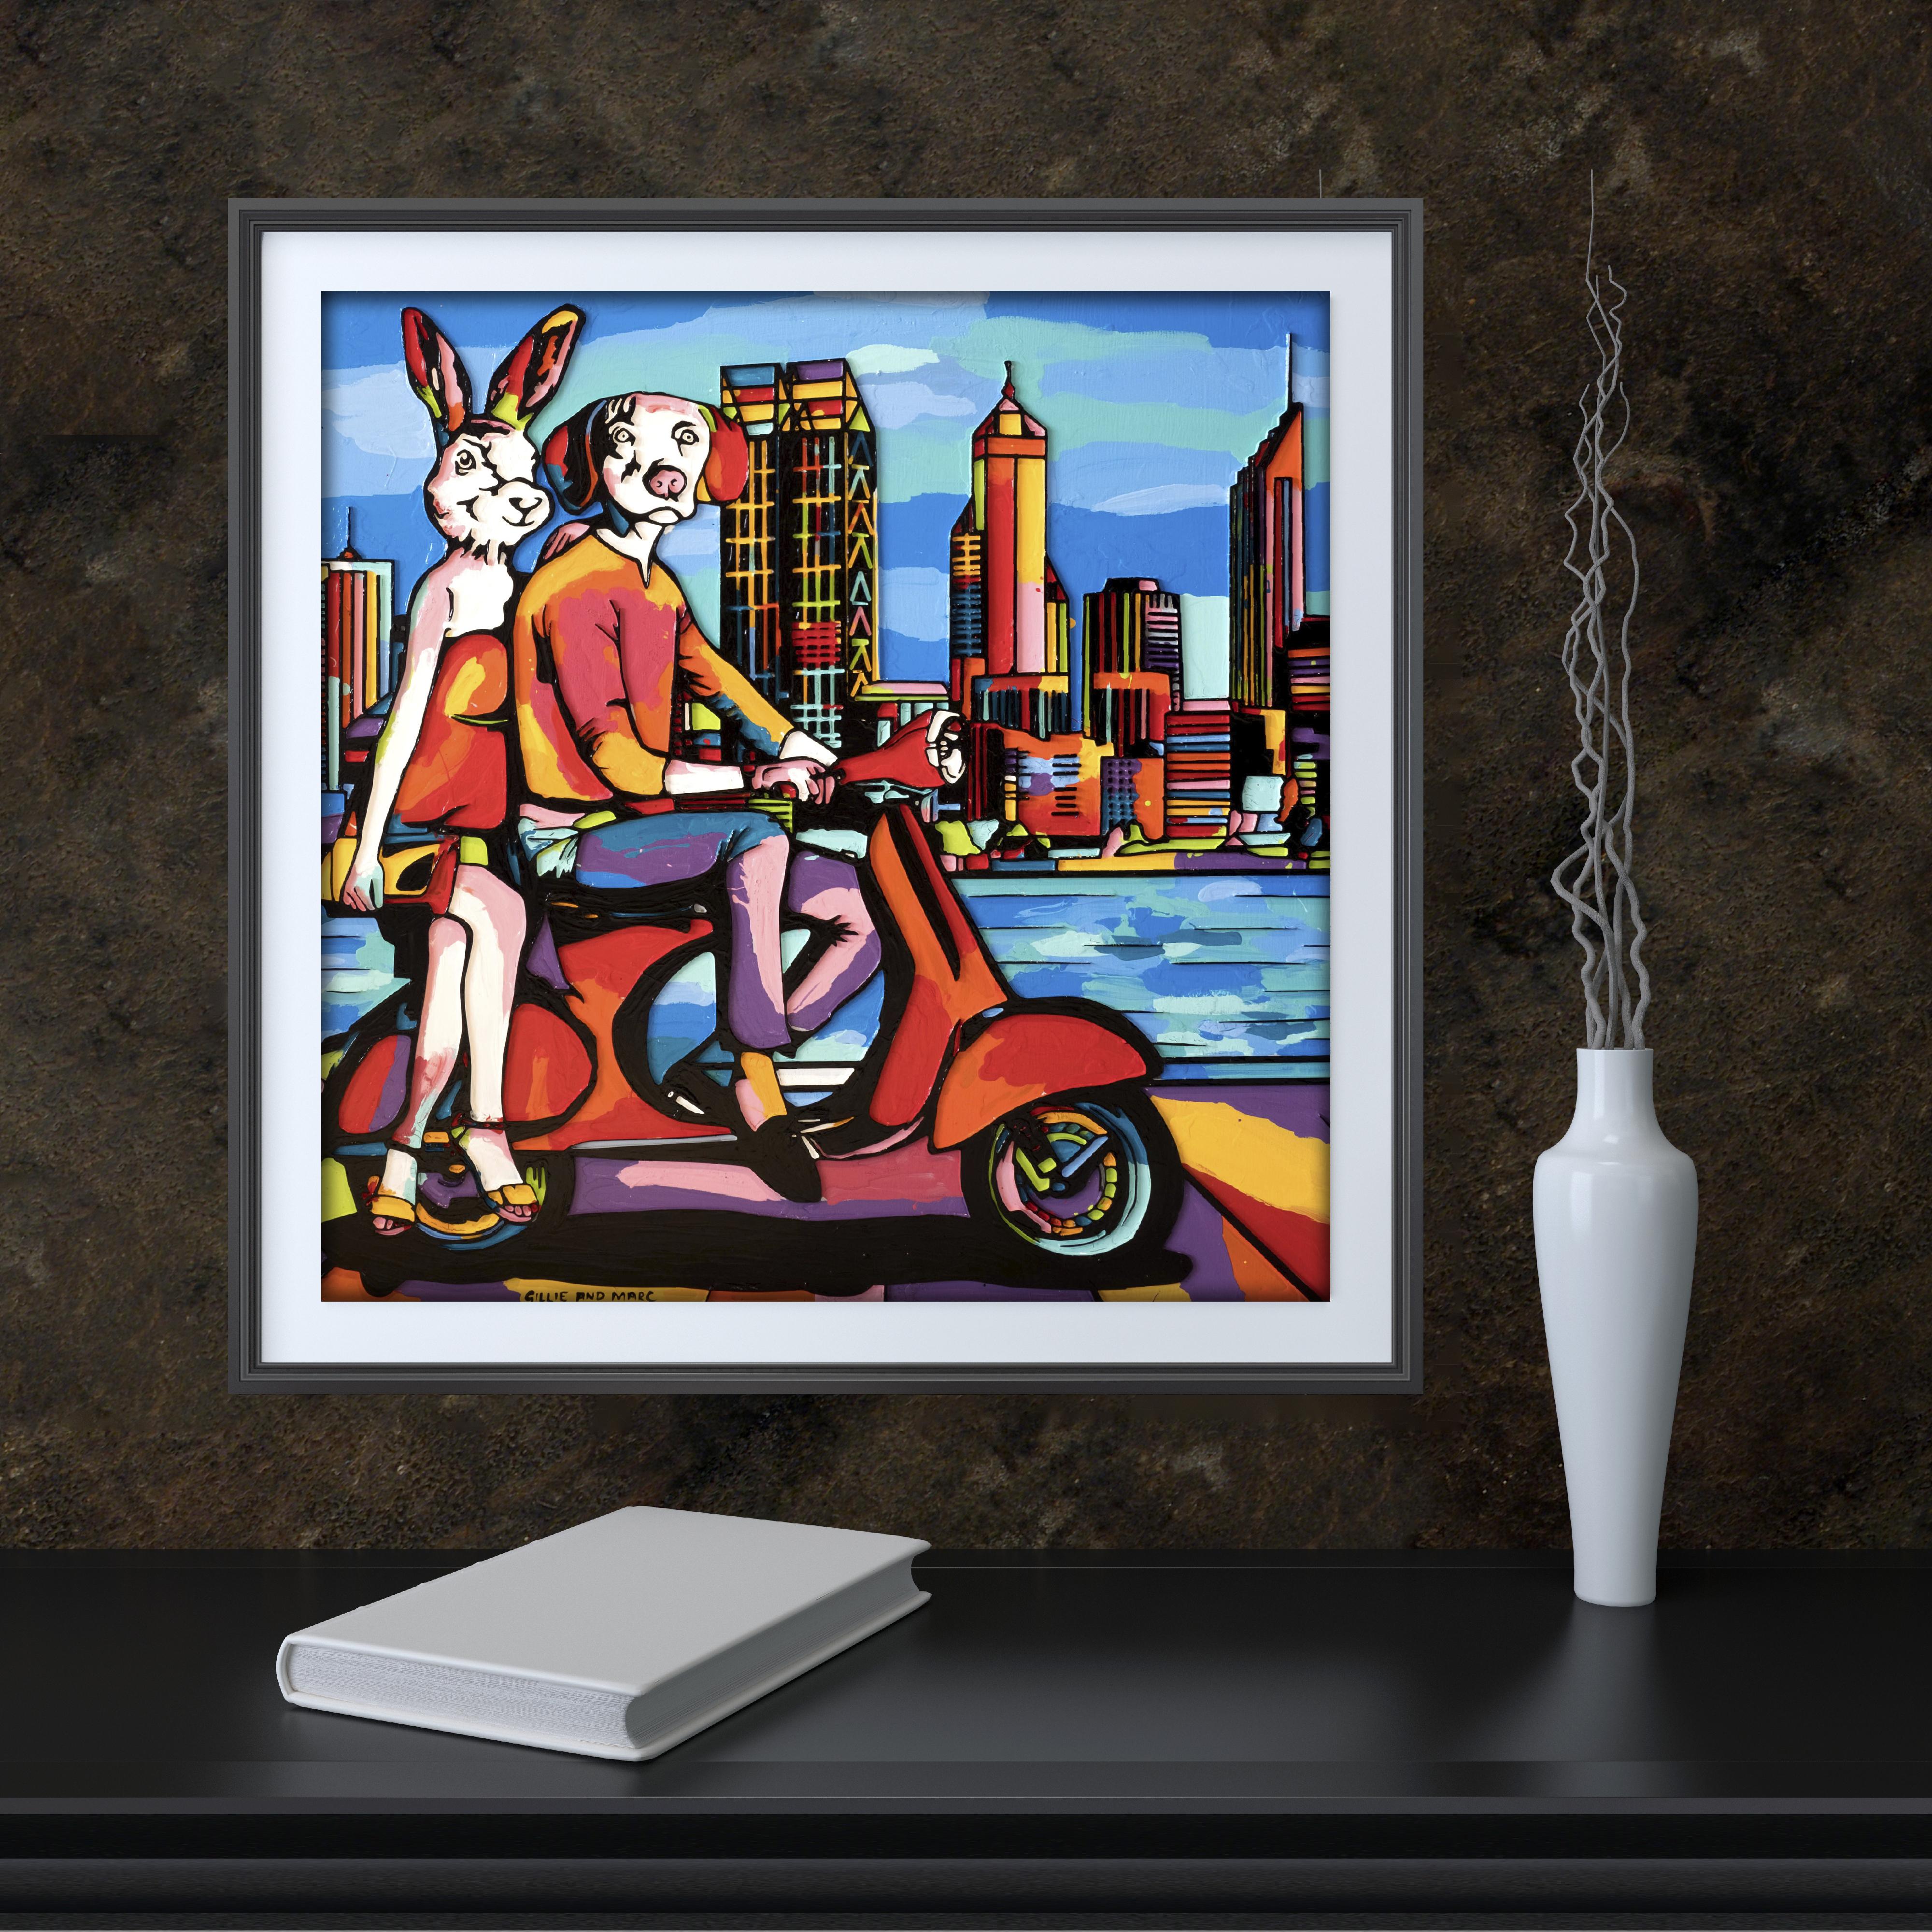 Pop Art - Animal Print - Gillie and Marc - Limited Edition - City driving-2019 - Black Interior Print by Gillie and Marc Schattner